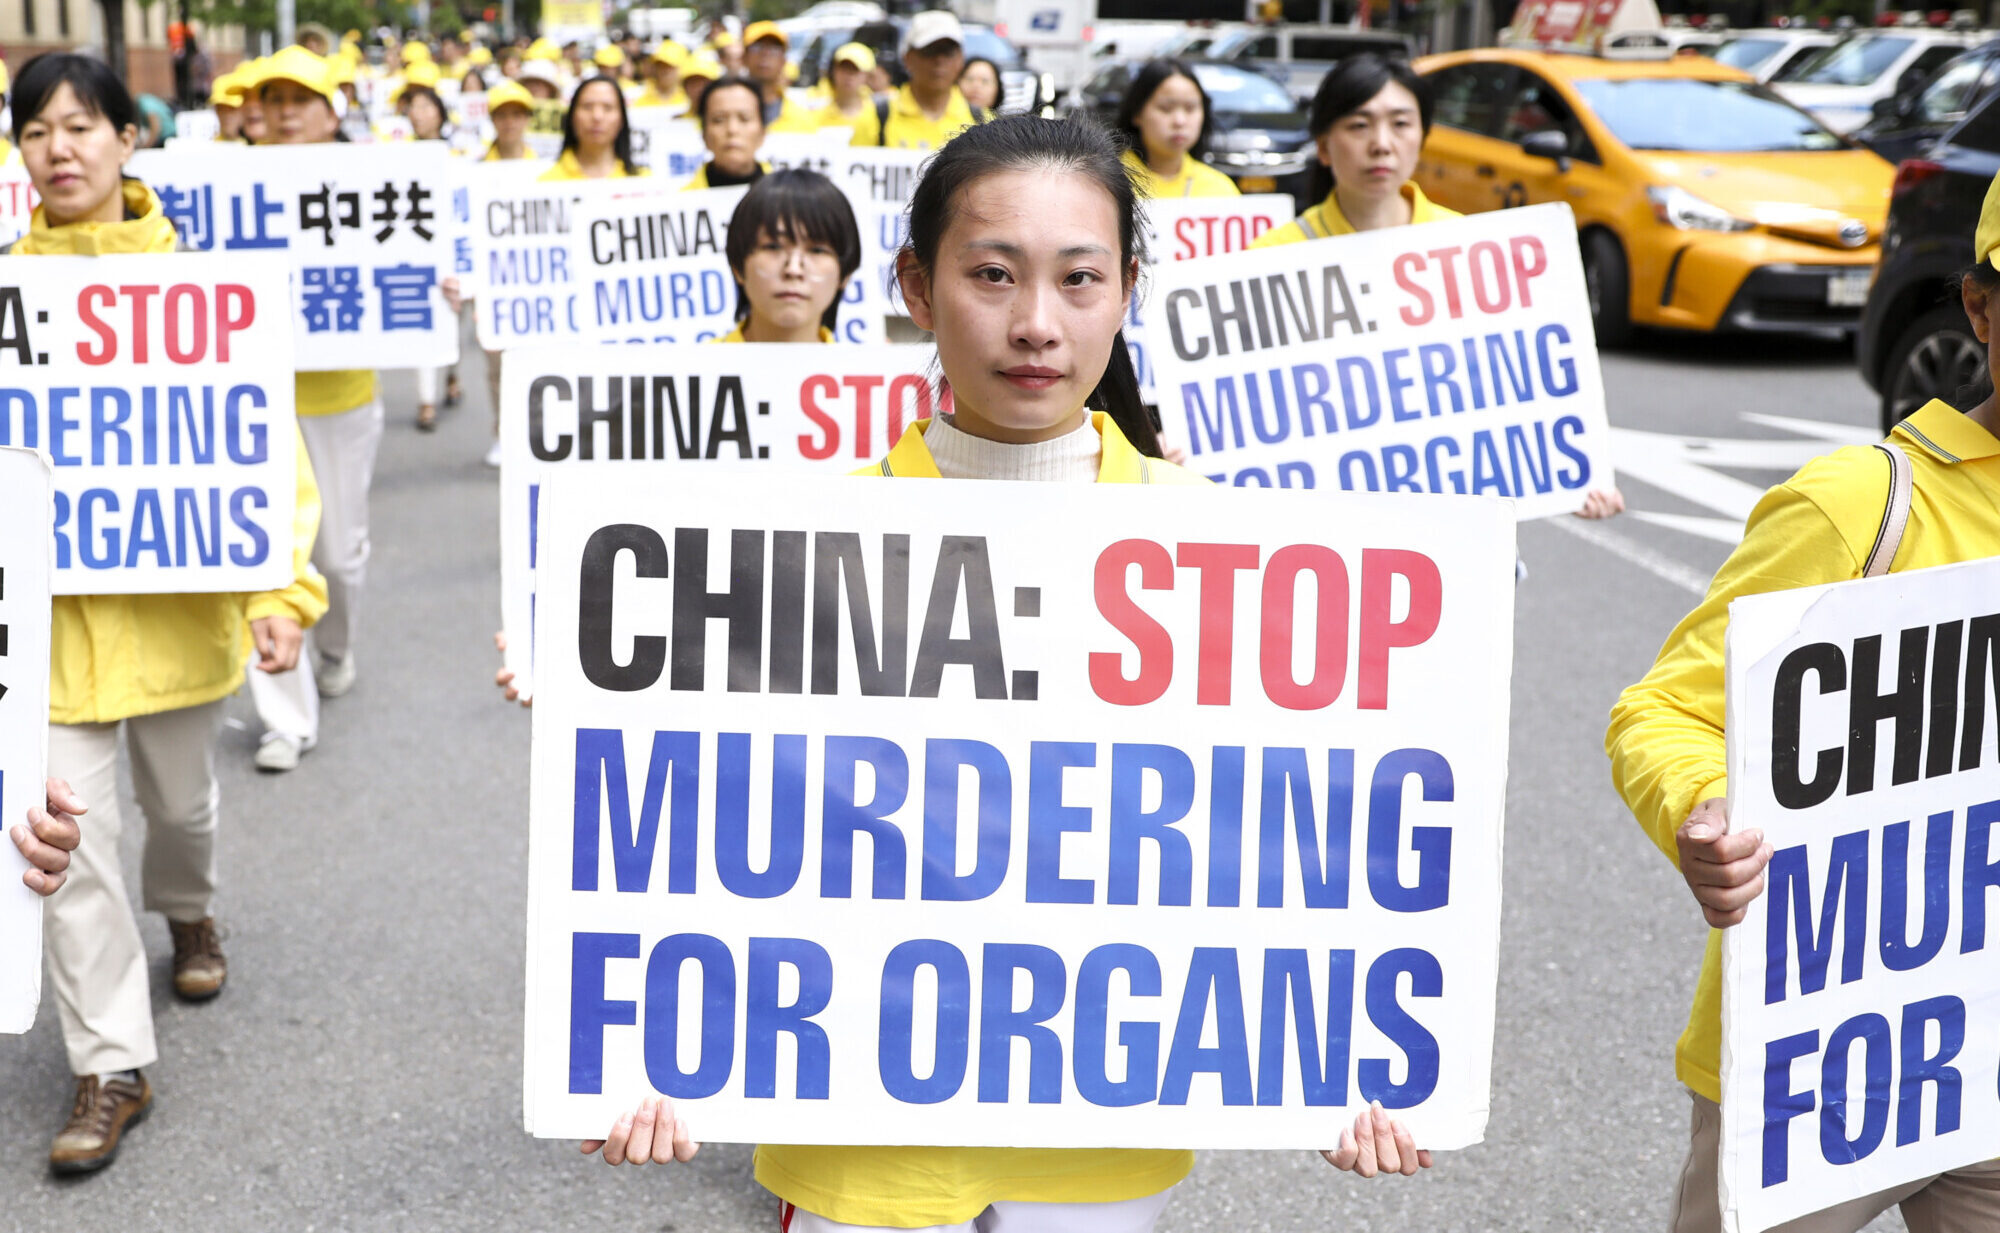 Ending Western Complicity in China’s Forced Organ Harvesting Will Come Next, Says Expert